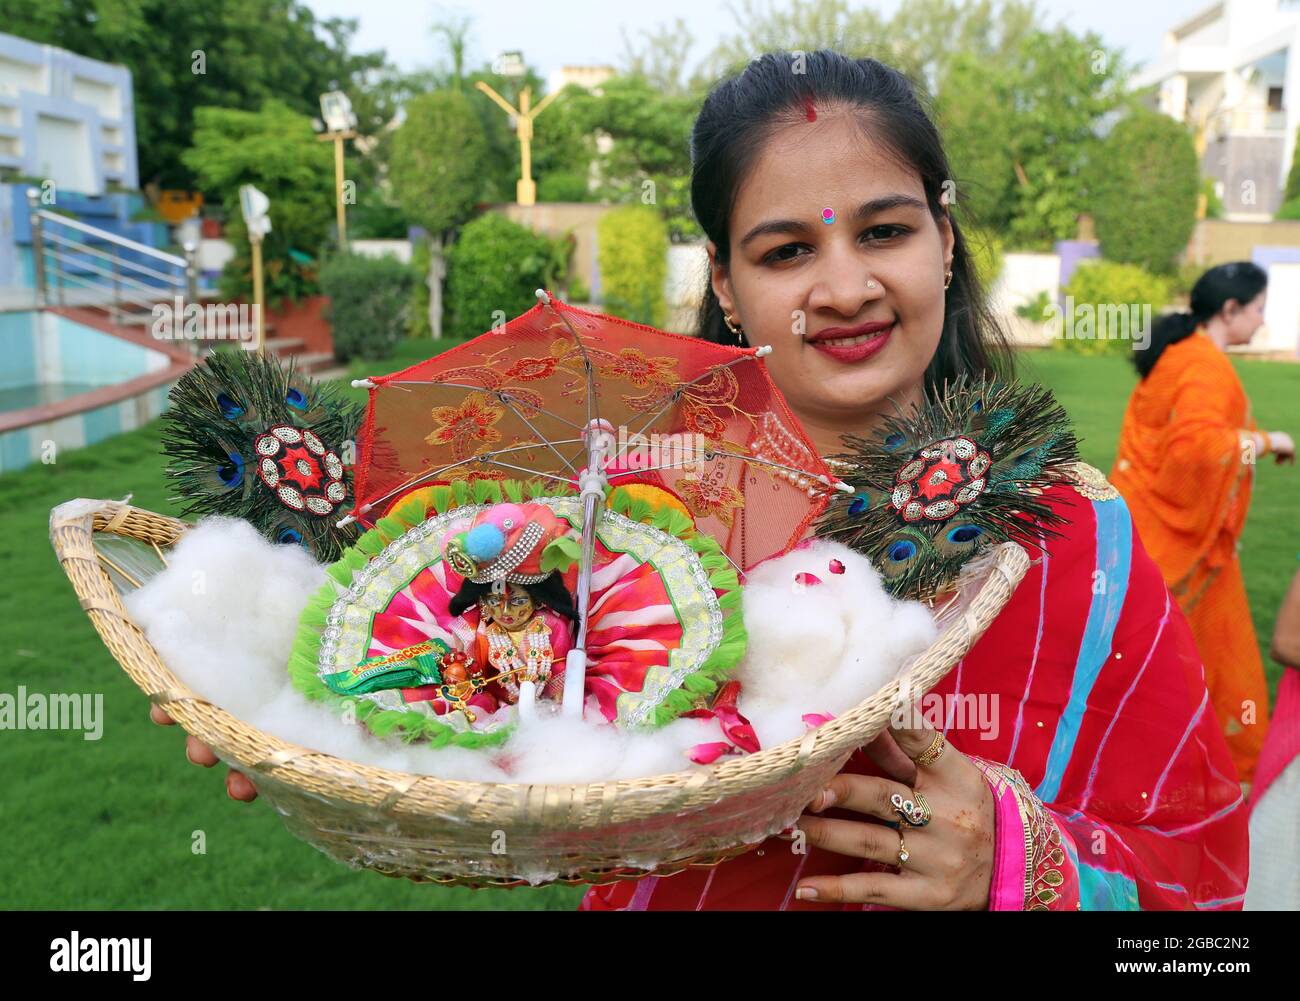 Beawar, Rajasthan, India, August 2, 2021: Hindu woman with the idol of Laddu Gopal (Lord Krishna), pose for a picture as she celebrate the holy month of Sawan (Shravan) in Beawar. Photo: Sumit Saraswat Stock Photo